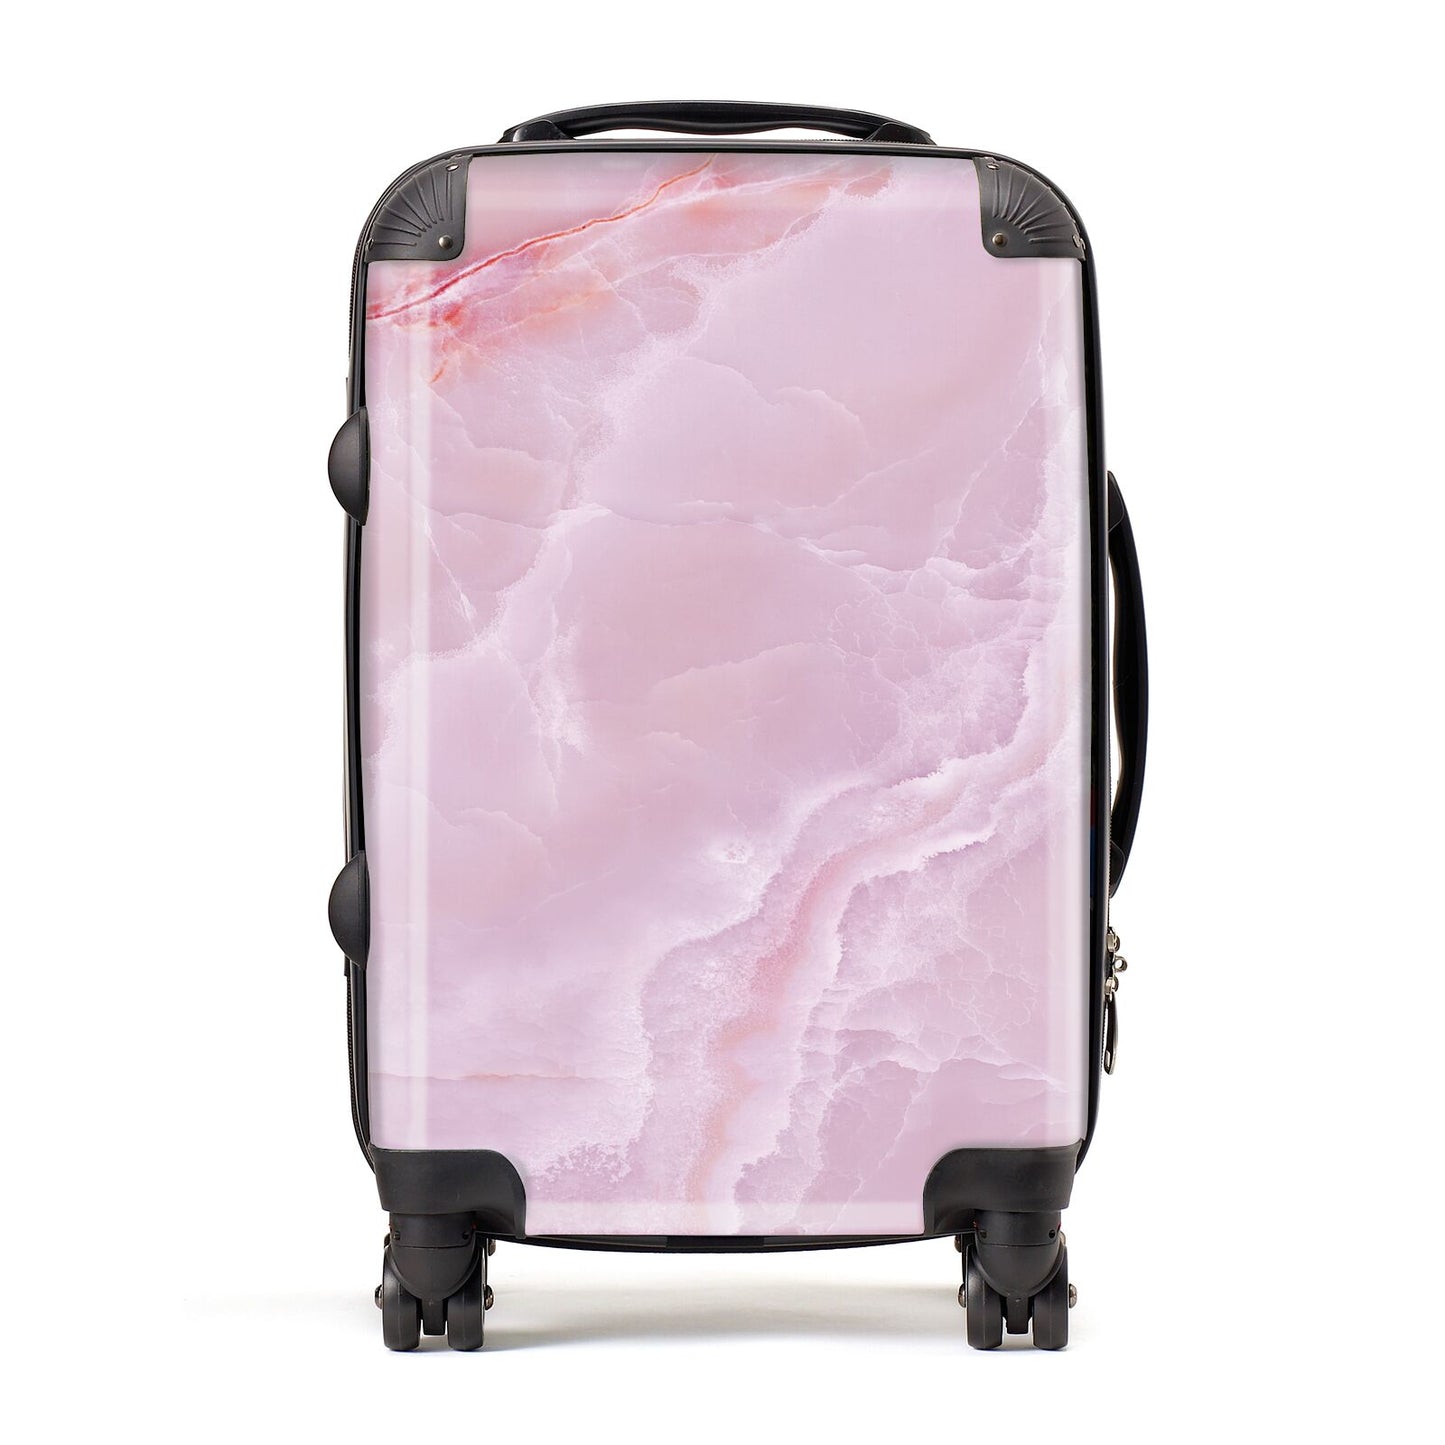 Dreamy Pink Marble Suitcase